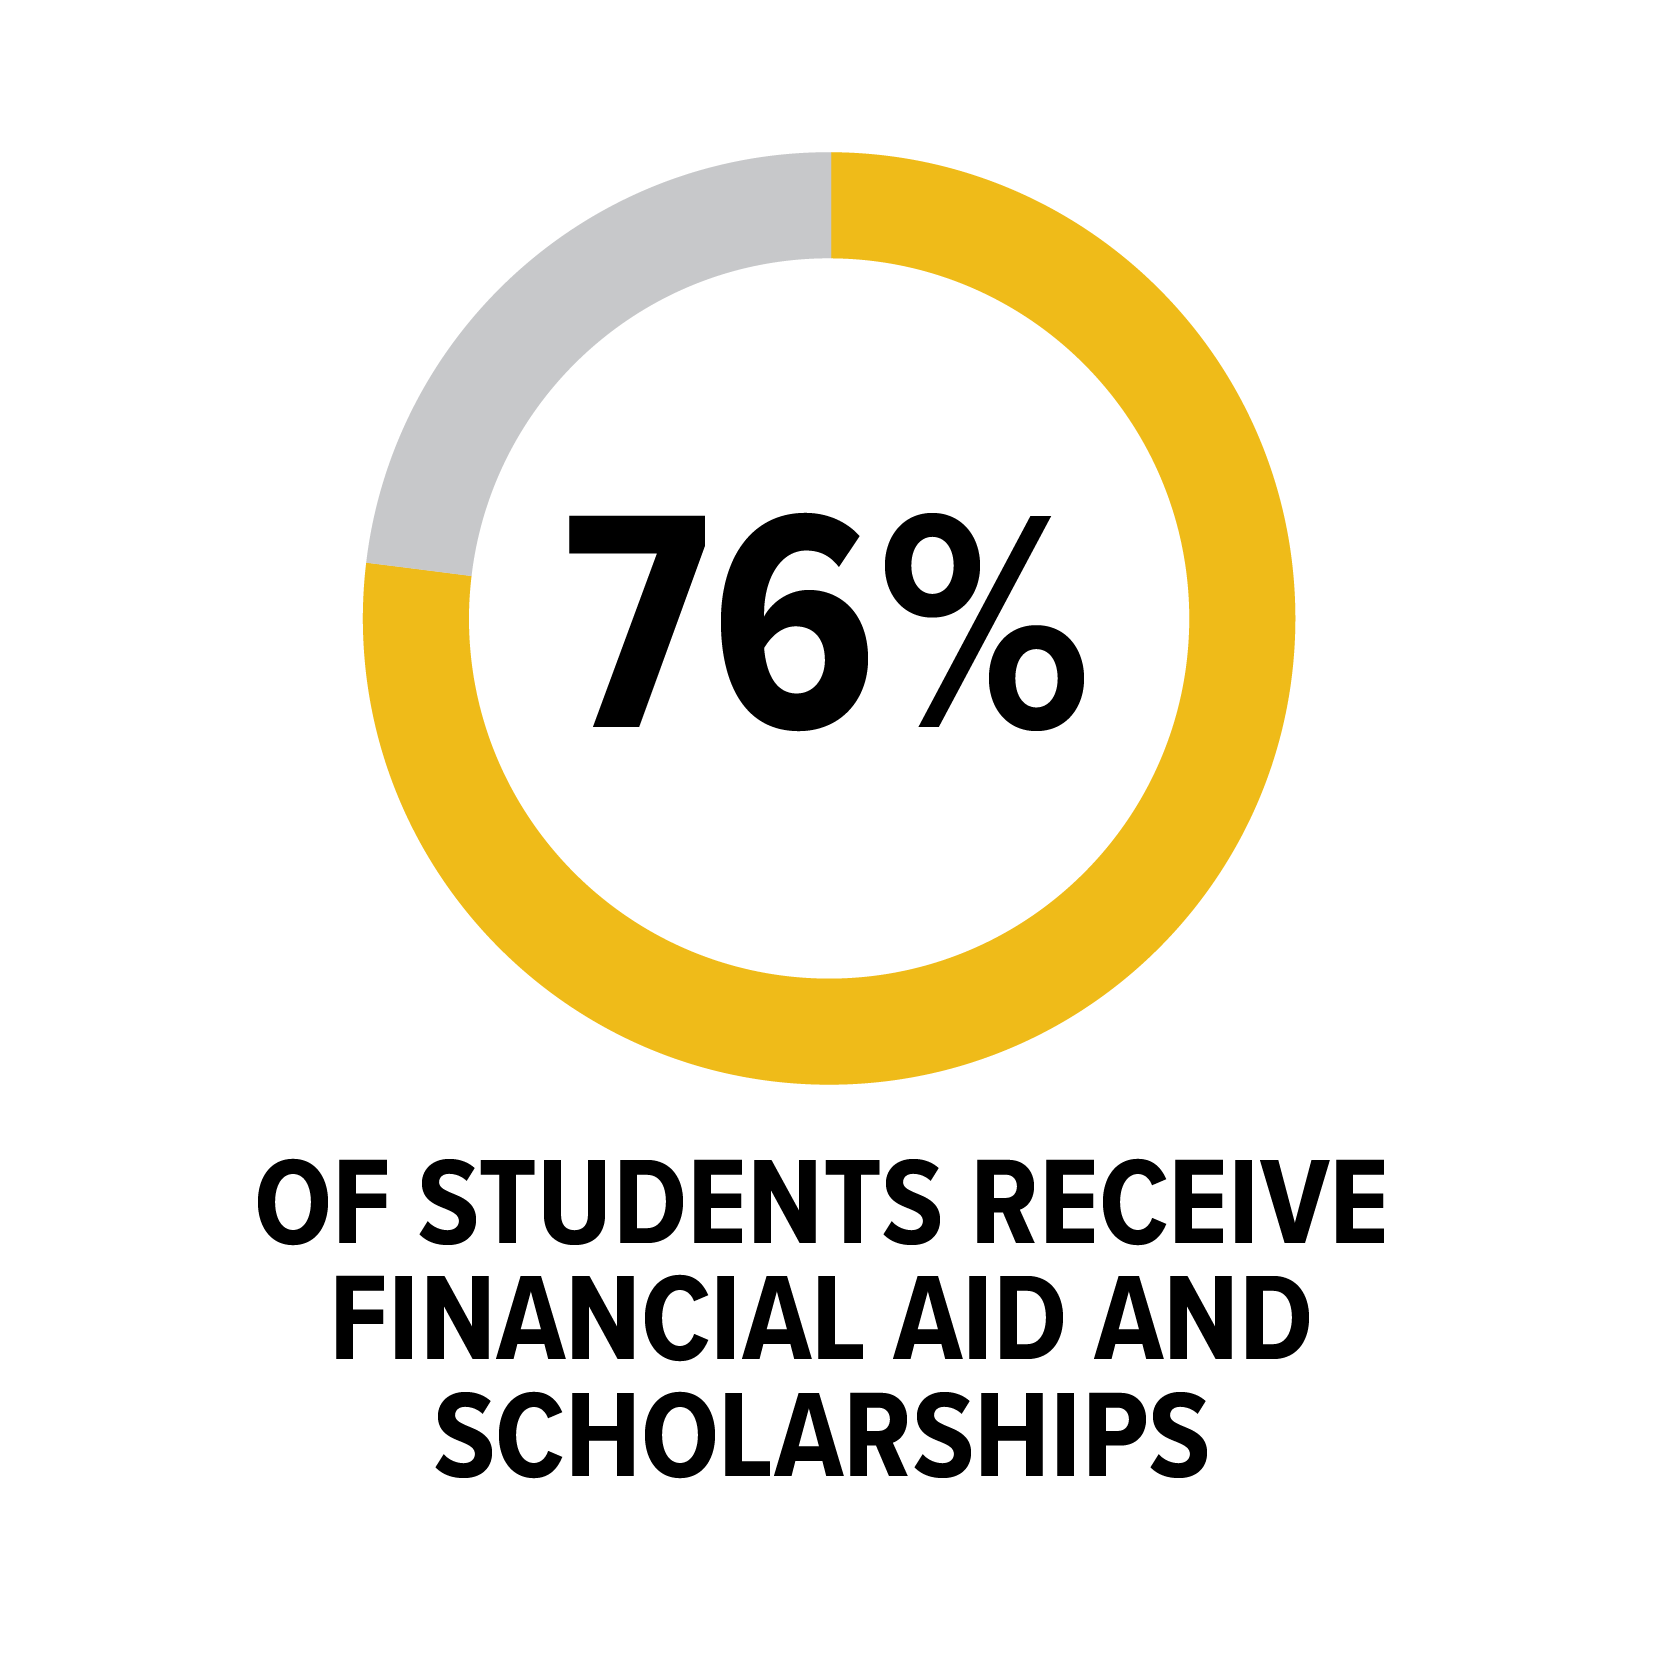 76 percent of students receive financial aid and scholarships